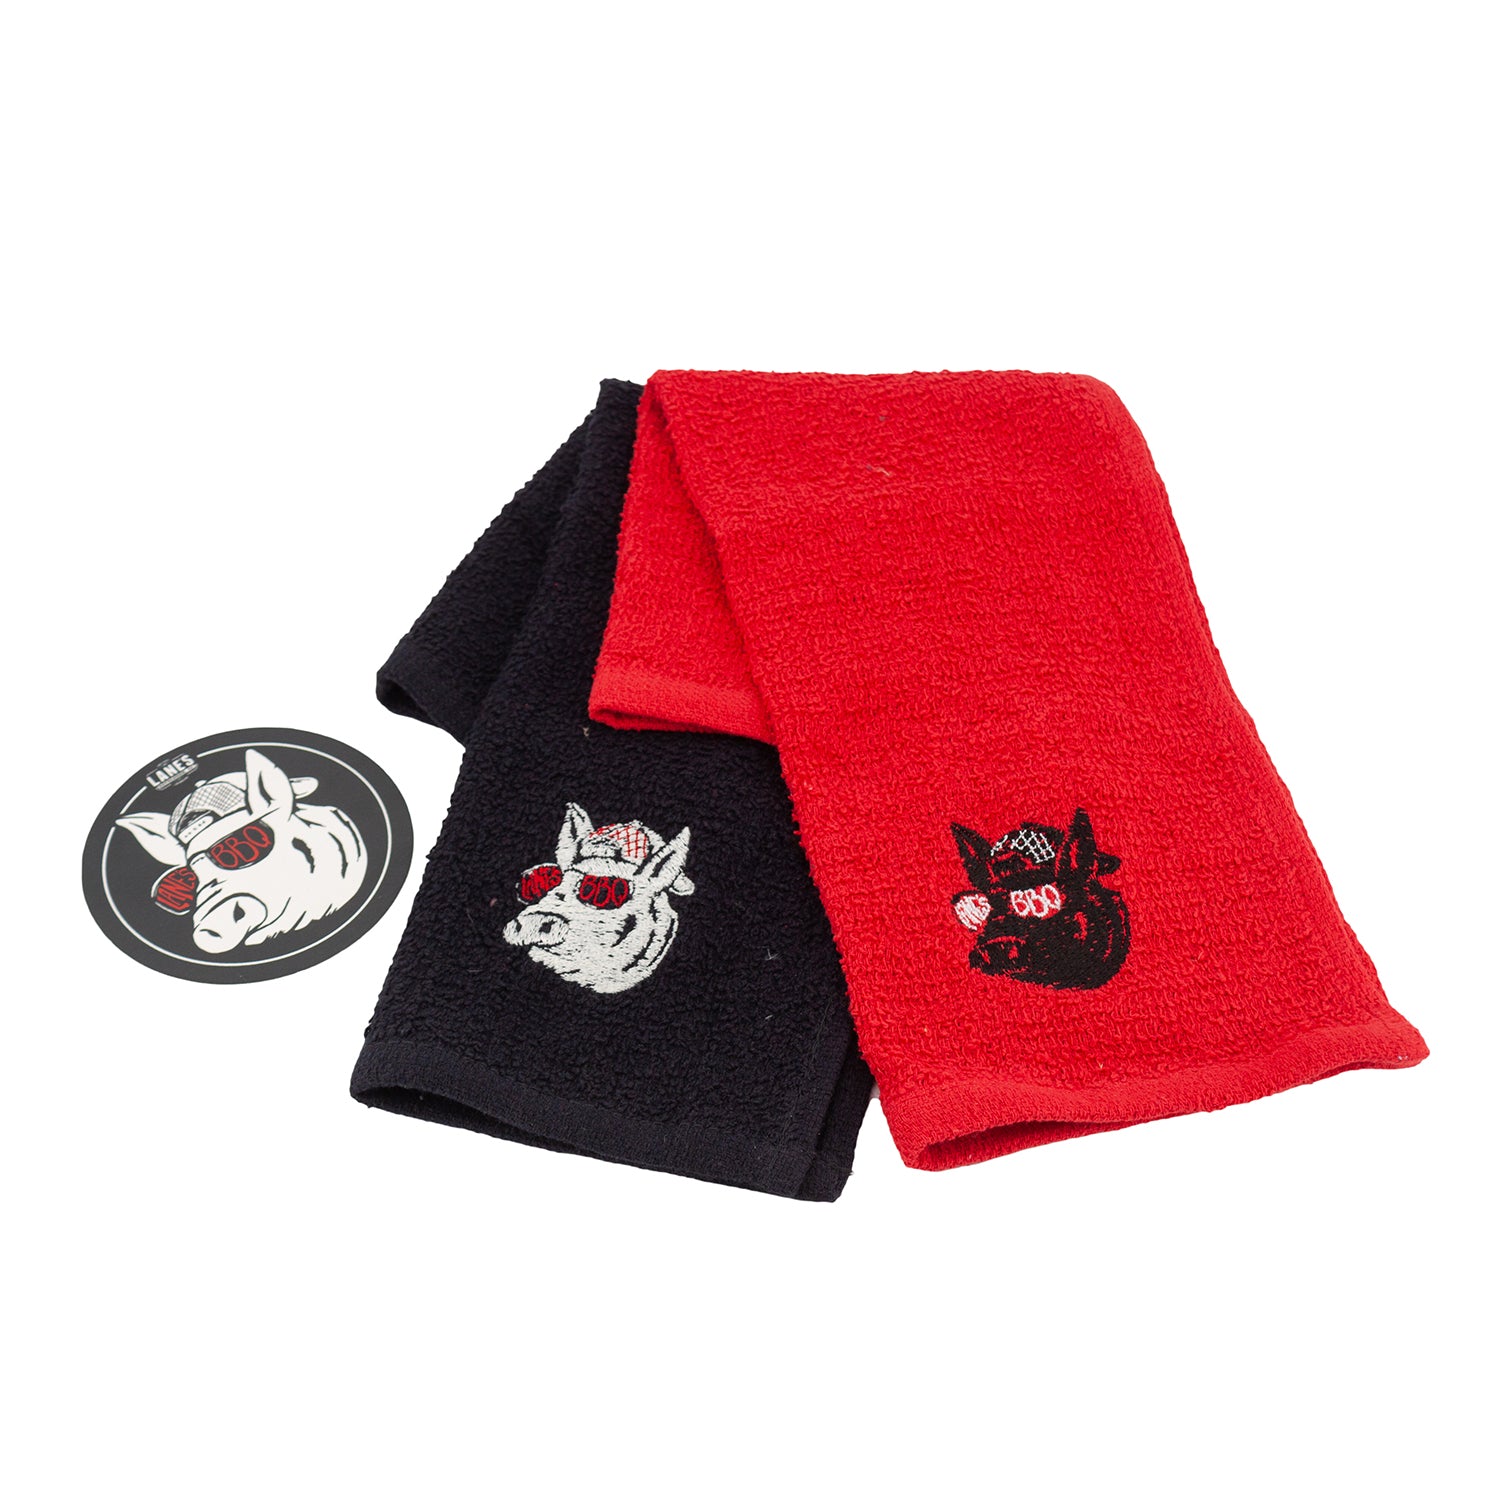 Lane's Black and Red Meat Towels